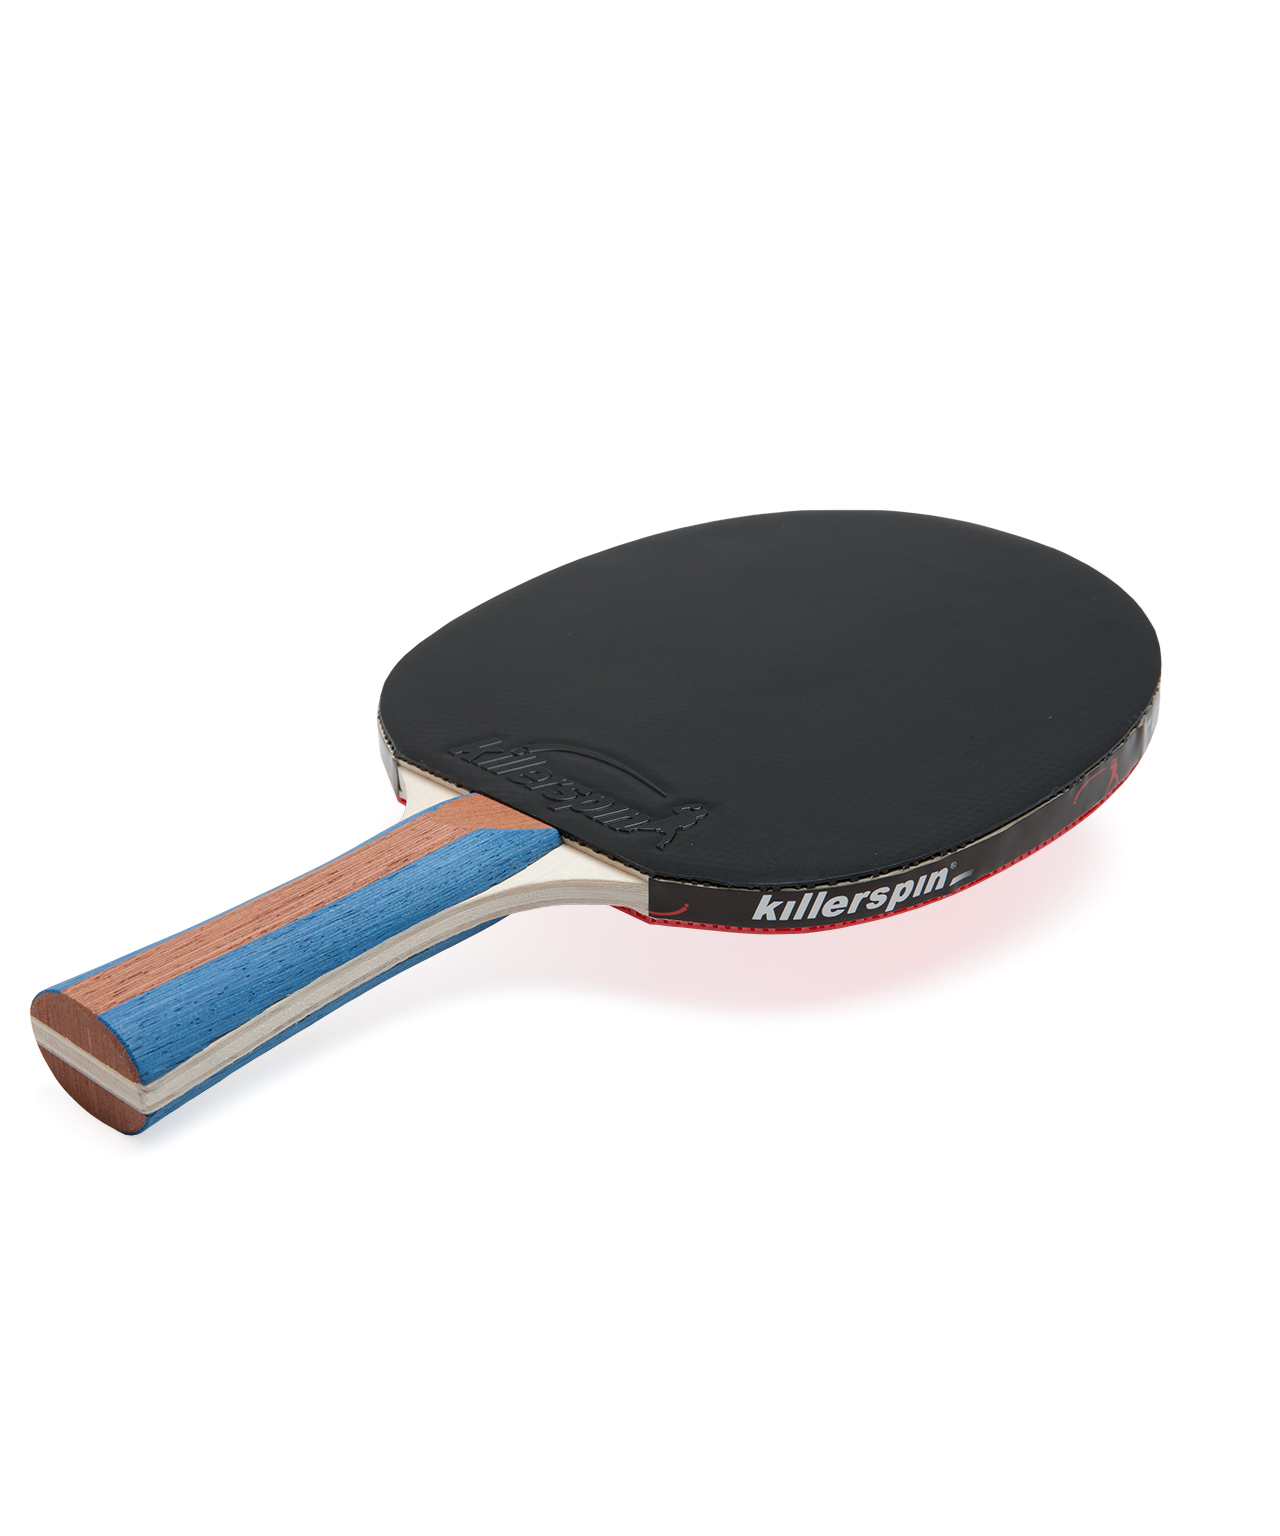 Killerspin JET SET 2 Table Tennis Set with 2 Paddles and 3 Balls - image 4 of 5